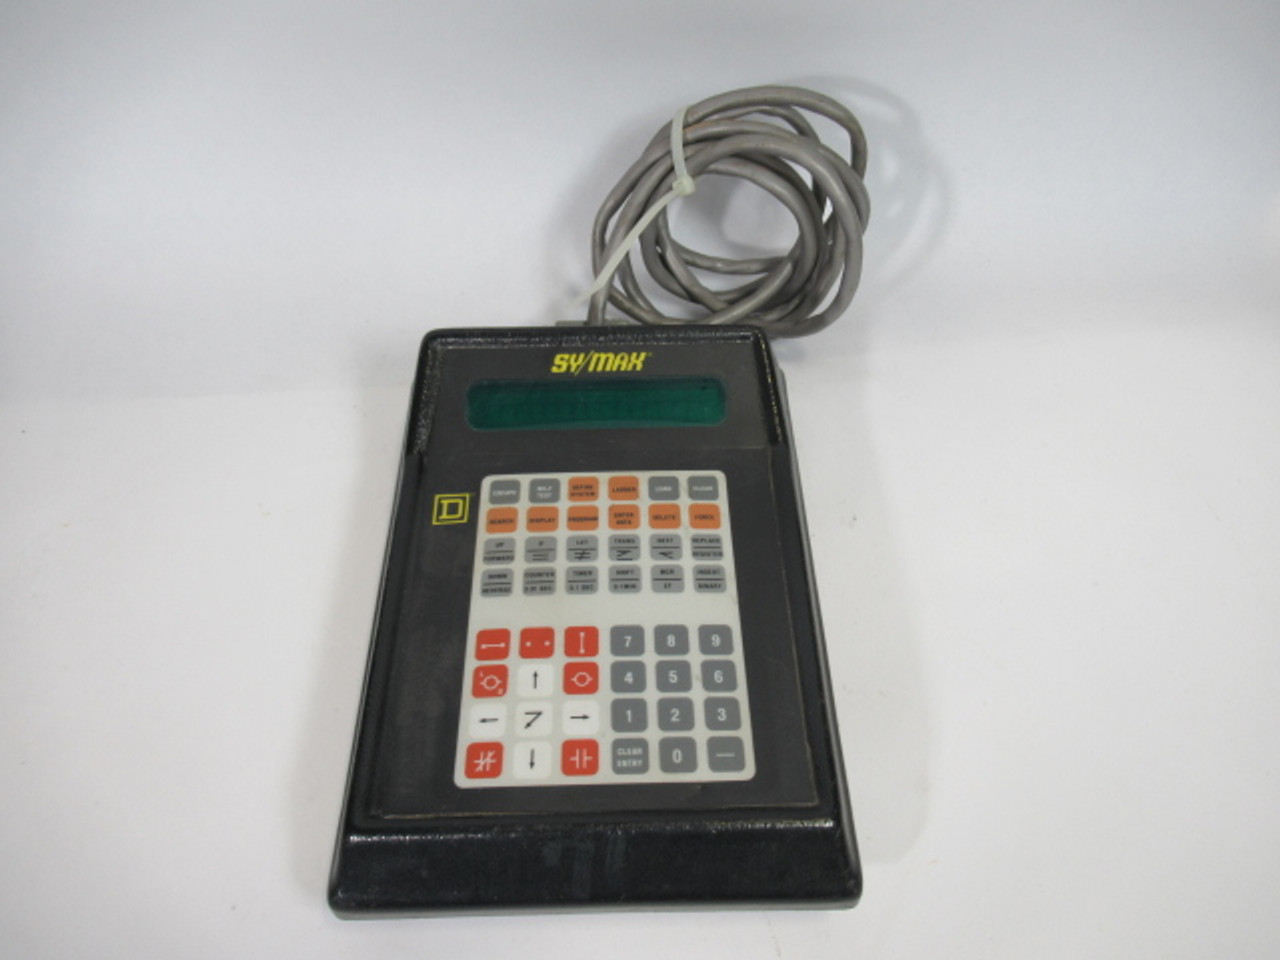 Square D 8010SPR-100 Symax Hand Held Programmer *Rust Internal Damage* ! AS IS !